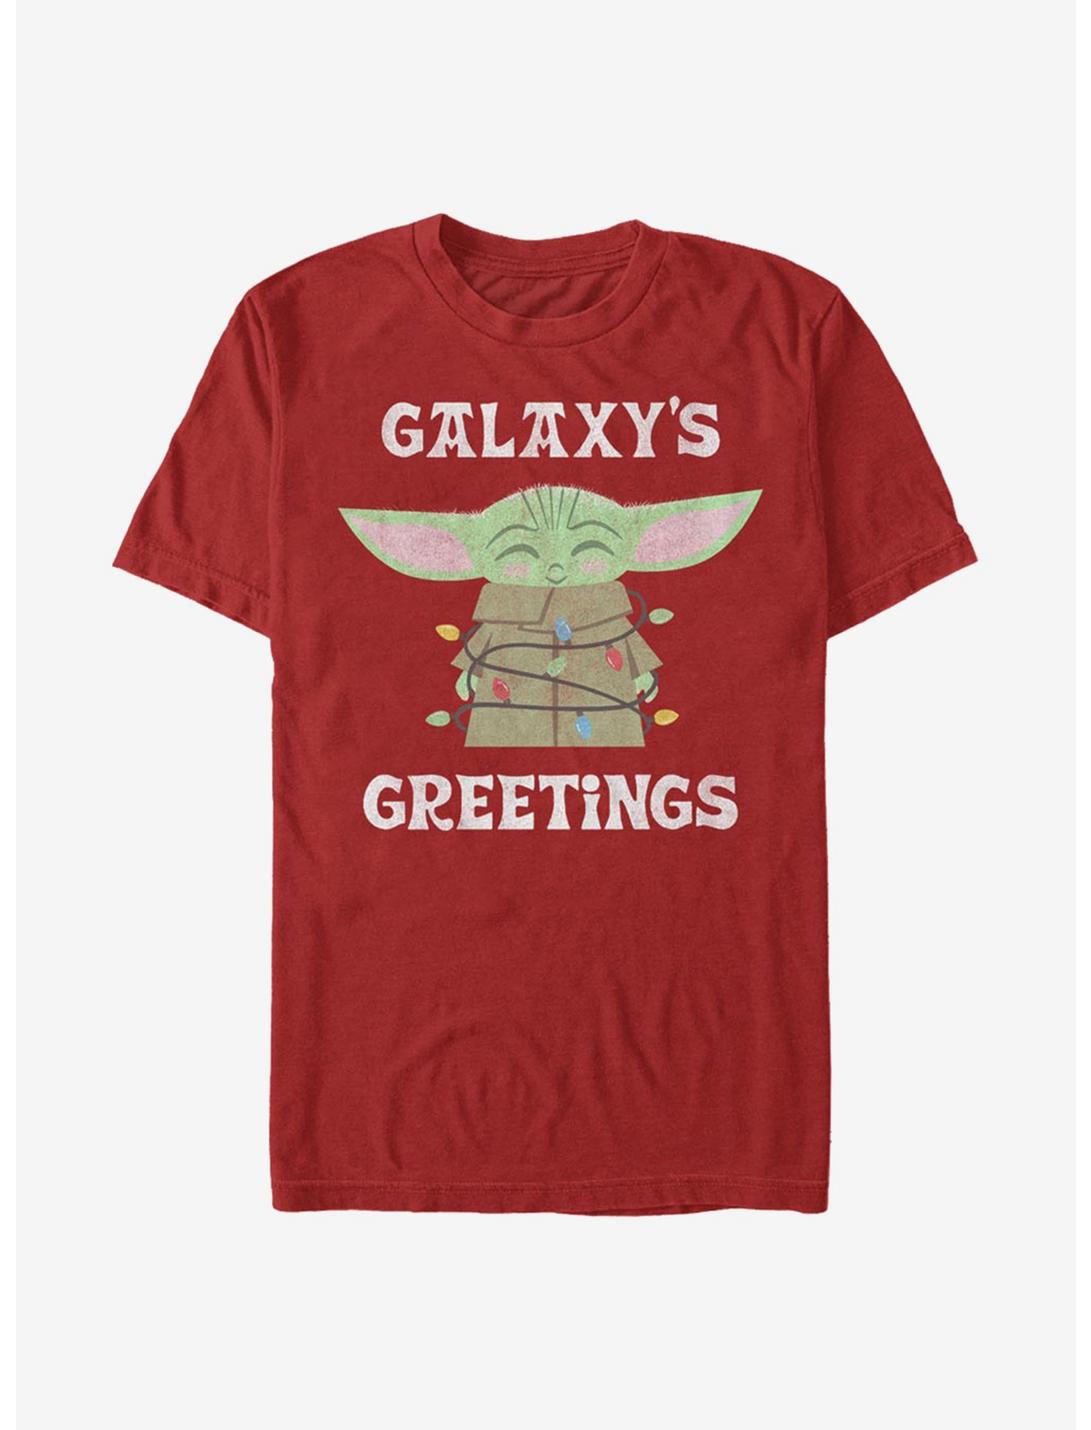 Star Wars The Mandalorian The Child Galaxy's Greetings T-Shirt, RED, hi-res